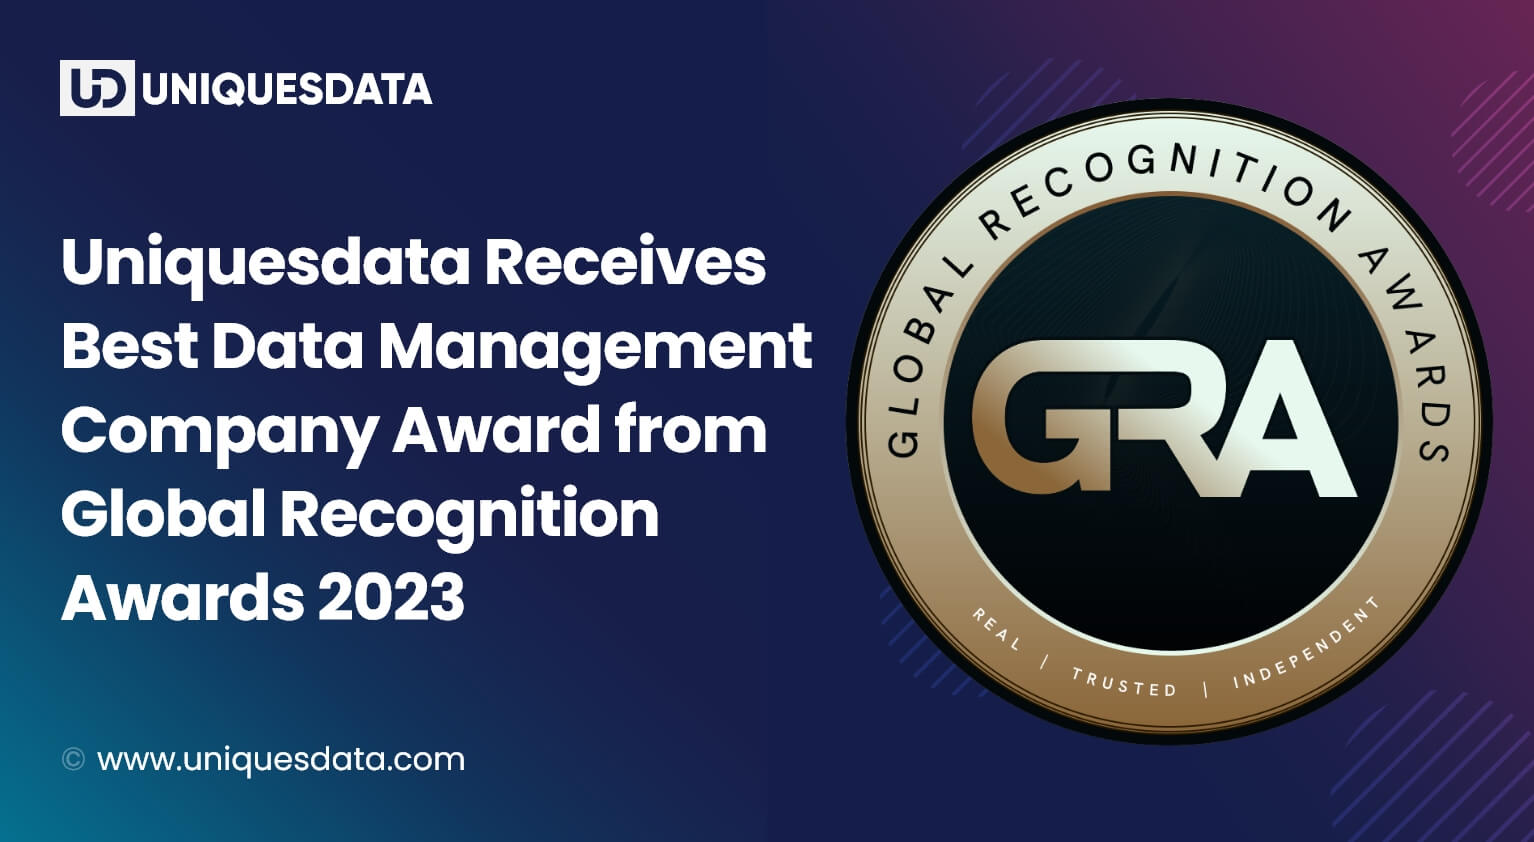 Uniquesdata Receives Best Data Management Company Award from Global Recognition Awards 2023